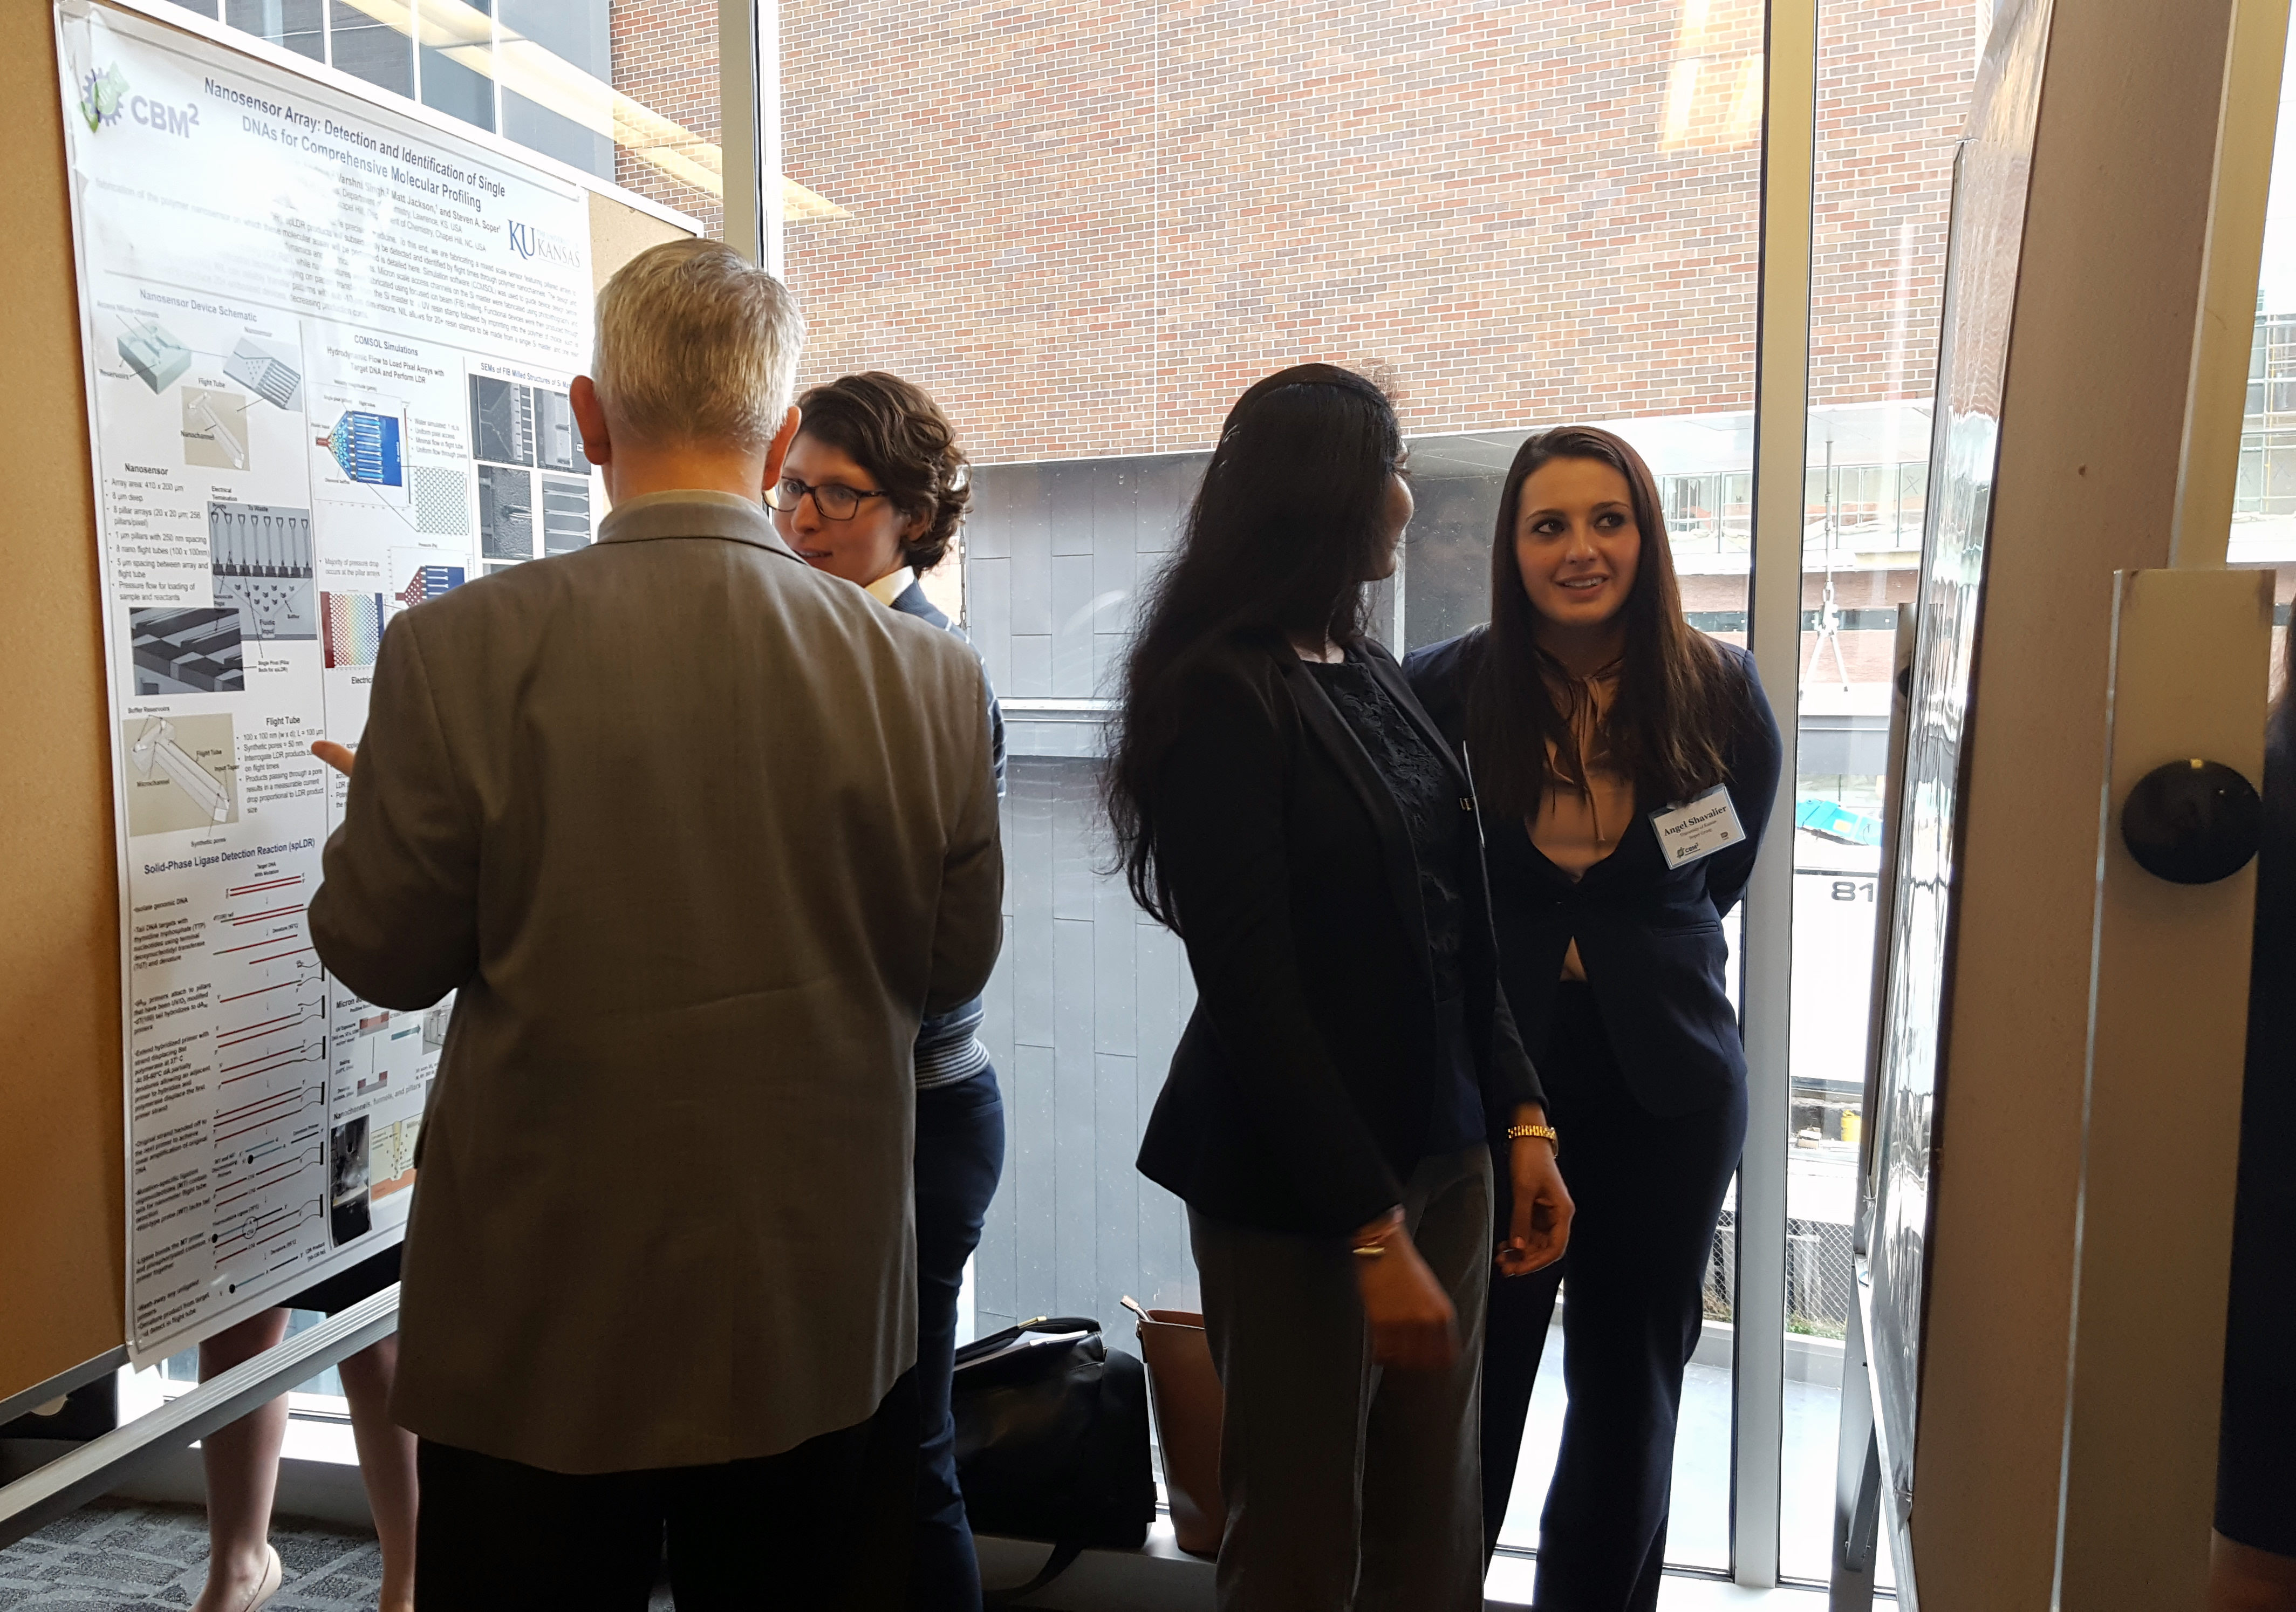 Four individuals split into two pairs, with each pair consisting of one person explaining the content on a research poster to an attentive listener.